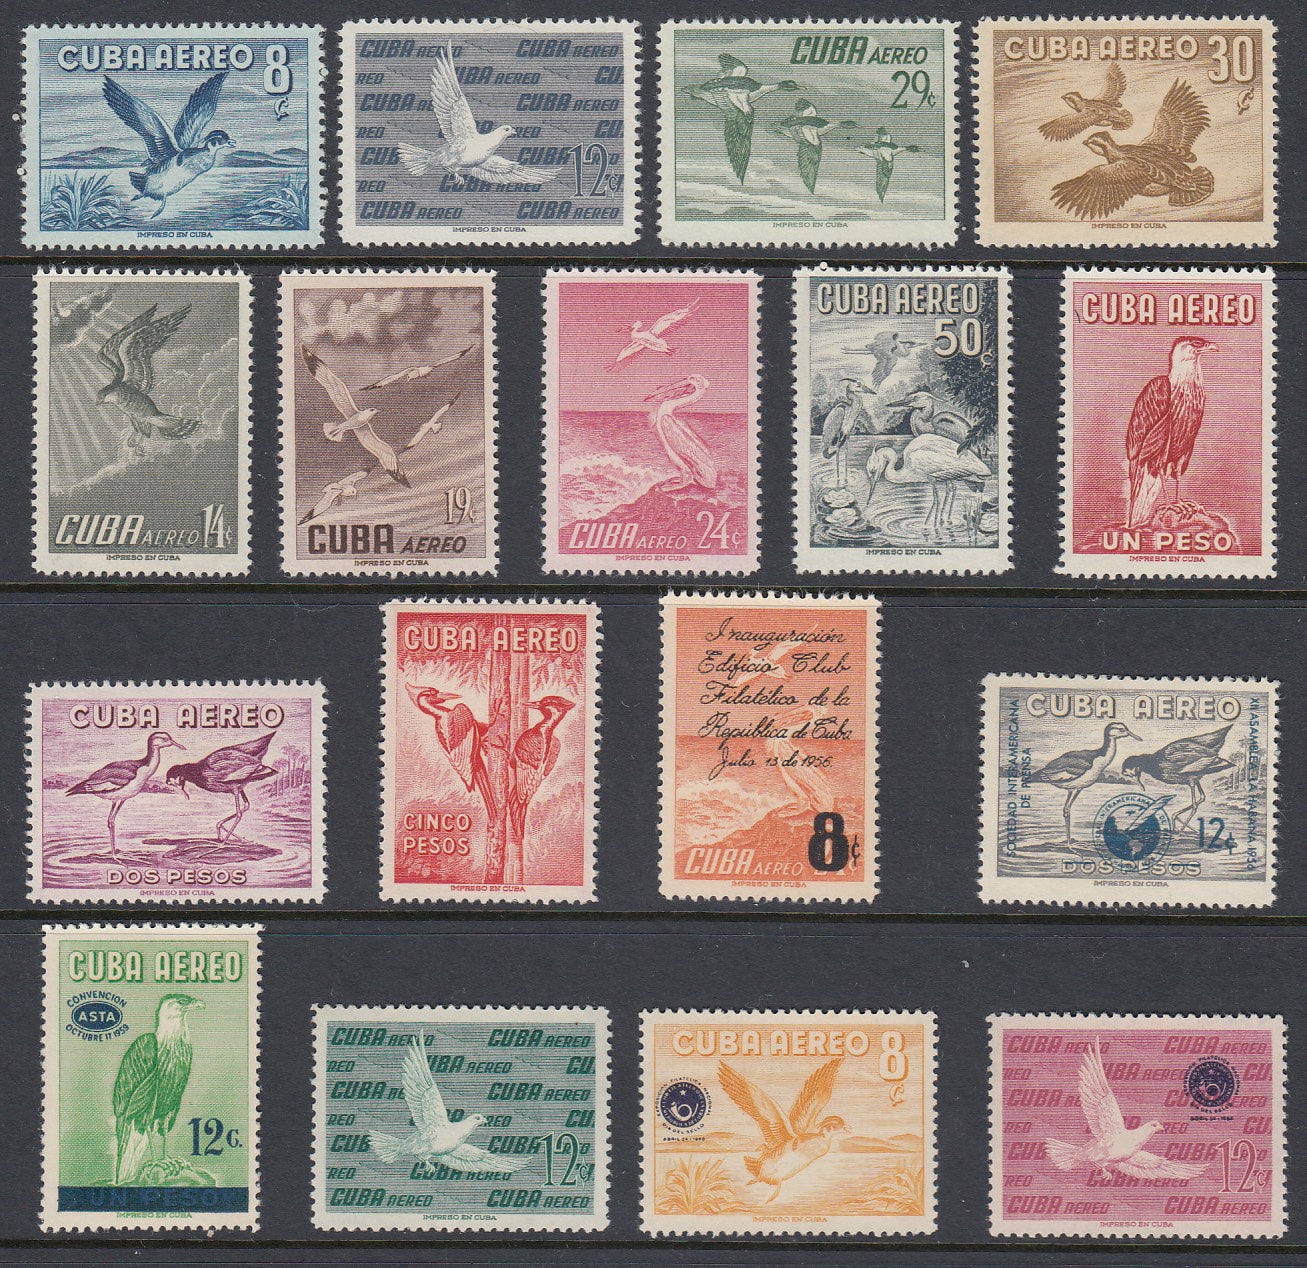 Cuba 1956 Birds Airmail Complete Set MNH + 8 Later Issues. Scott C136-C146 + Others